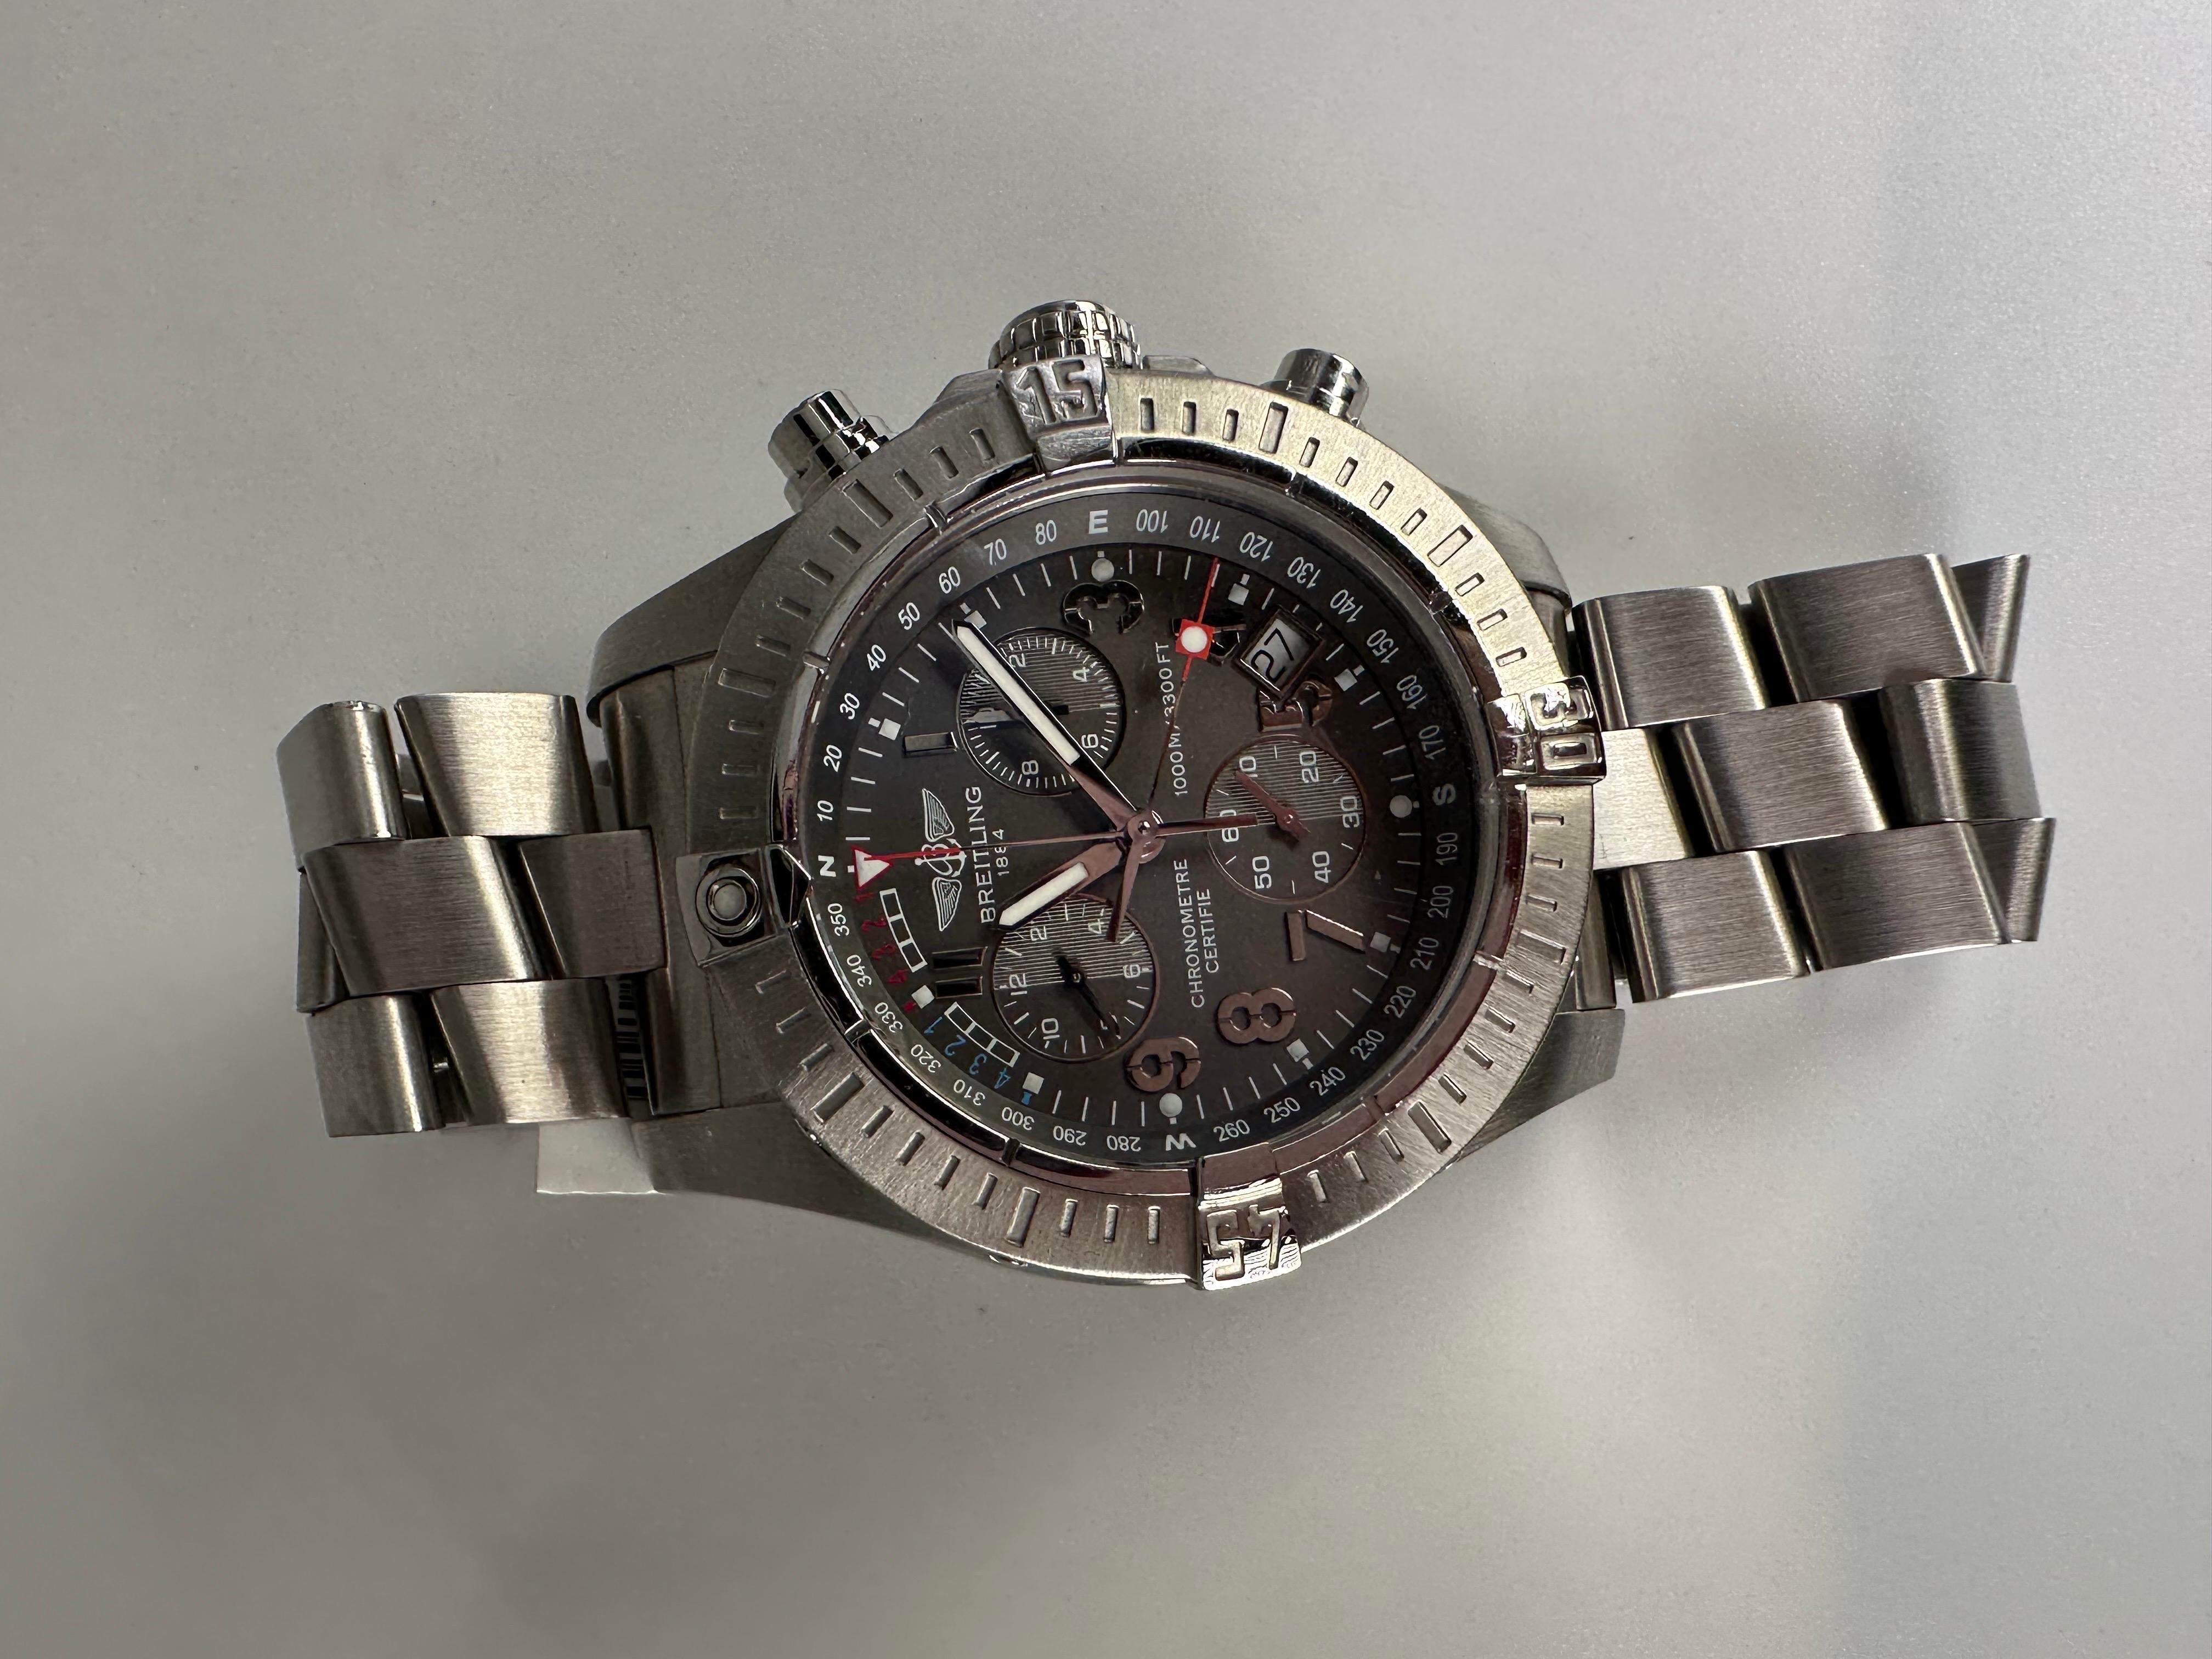 Beautiful watch in stainless steel by Breitling, mint condition. No box or papers. Model name “Avenger Seawolf”

MODEL:A73390/1276896
Item#: 500-00022MPTT

WHAT YOU GET AT STAMPAR JEWELERS:
Stampar Jewelers, located in the heart of Jupiter, Florida,